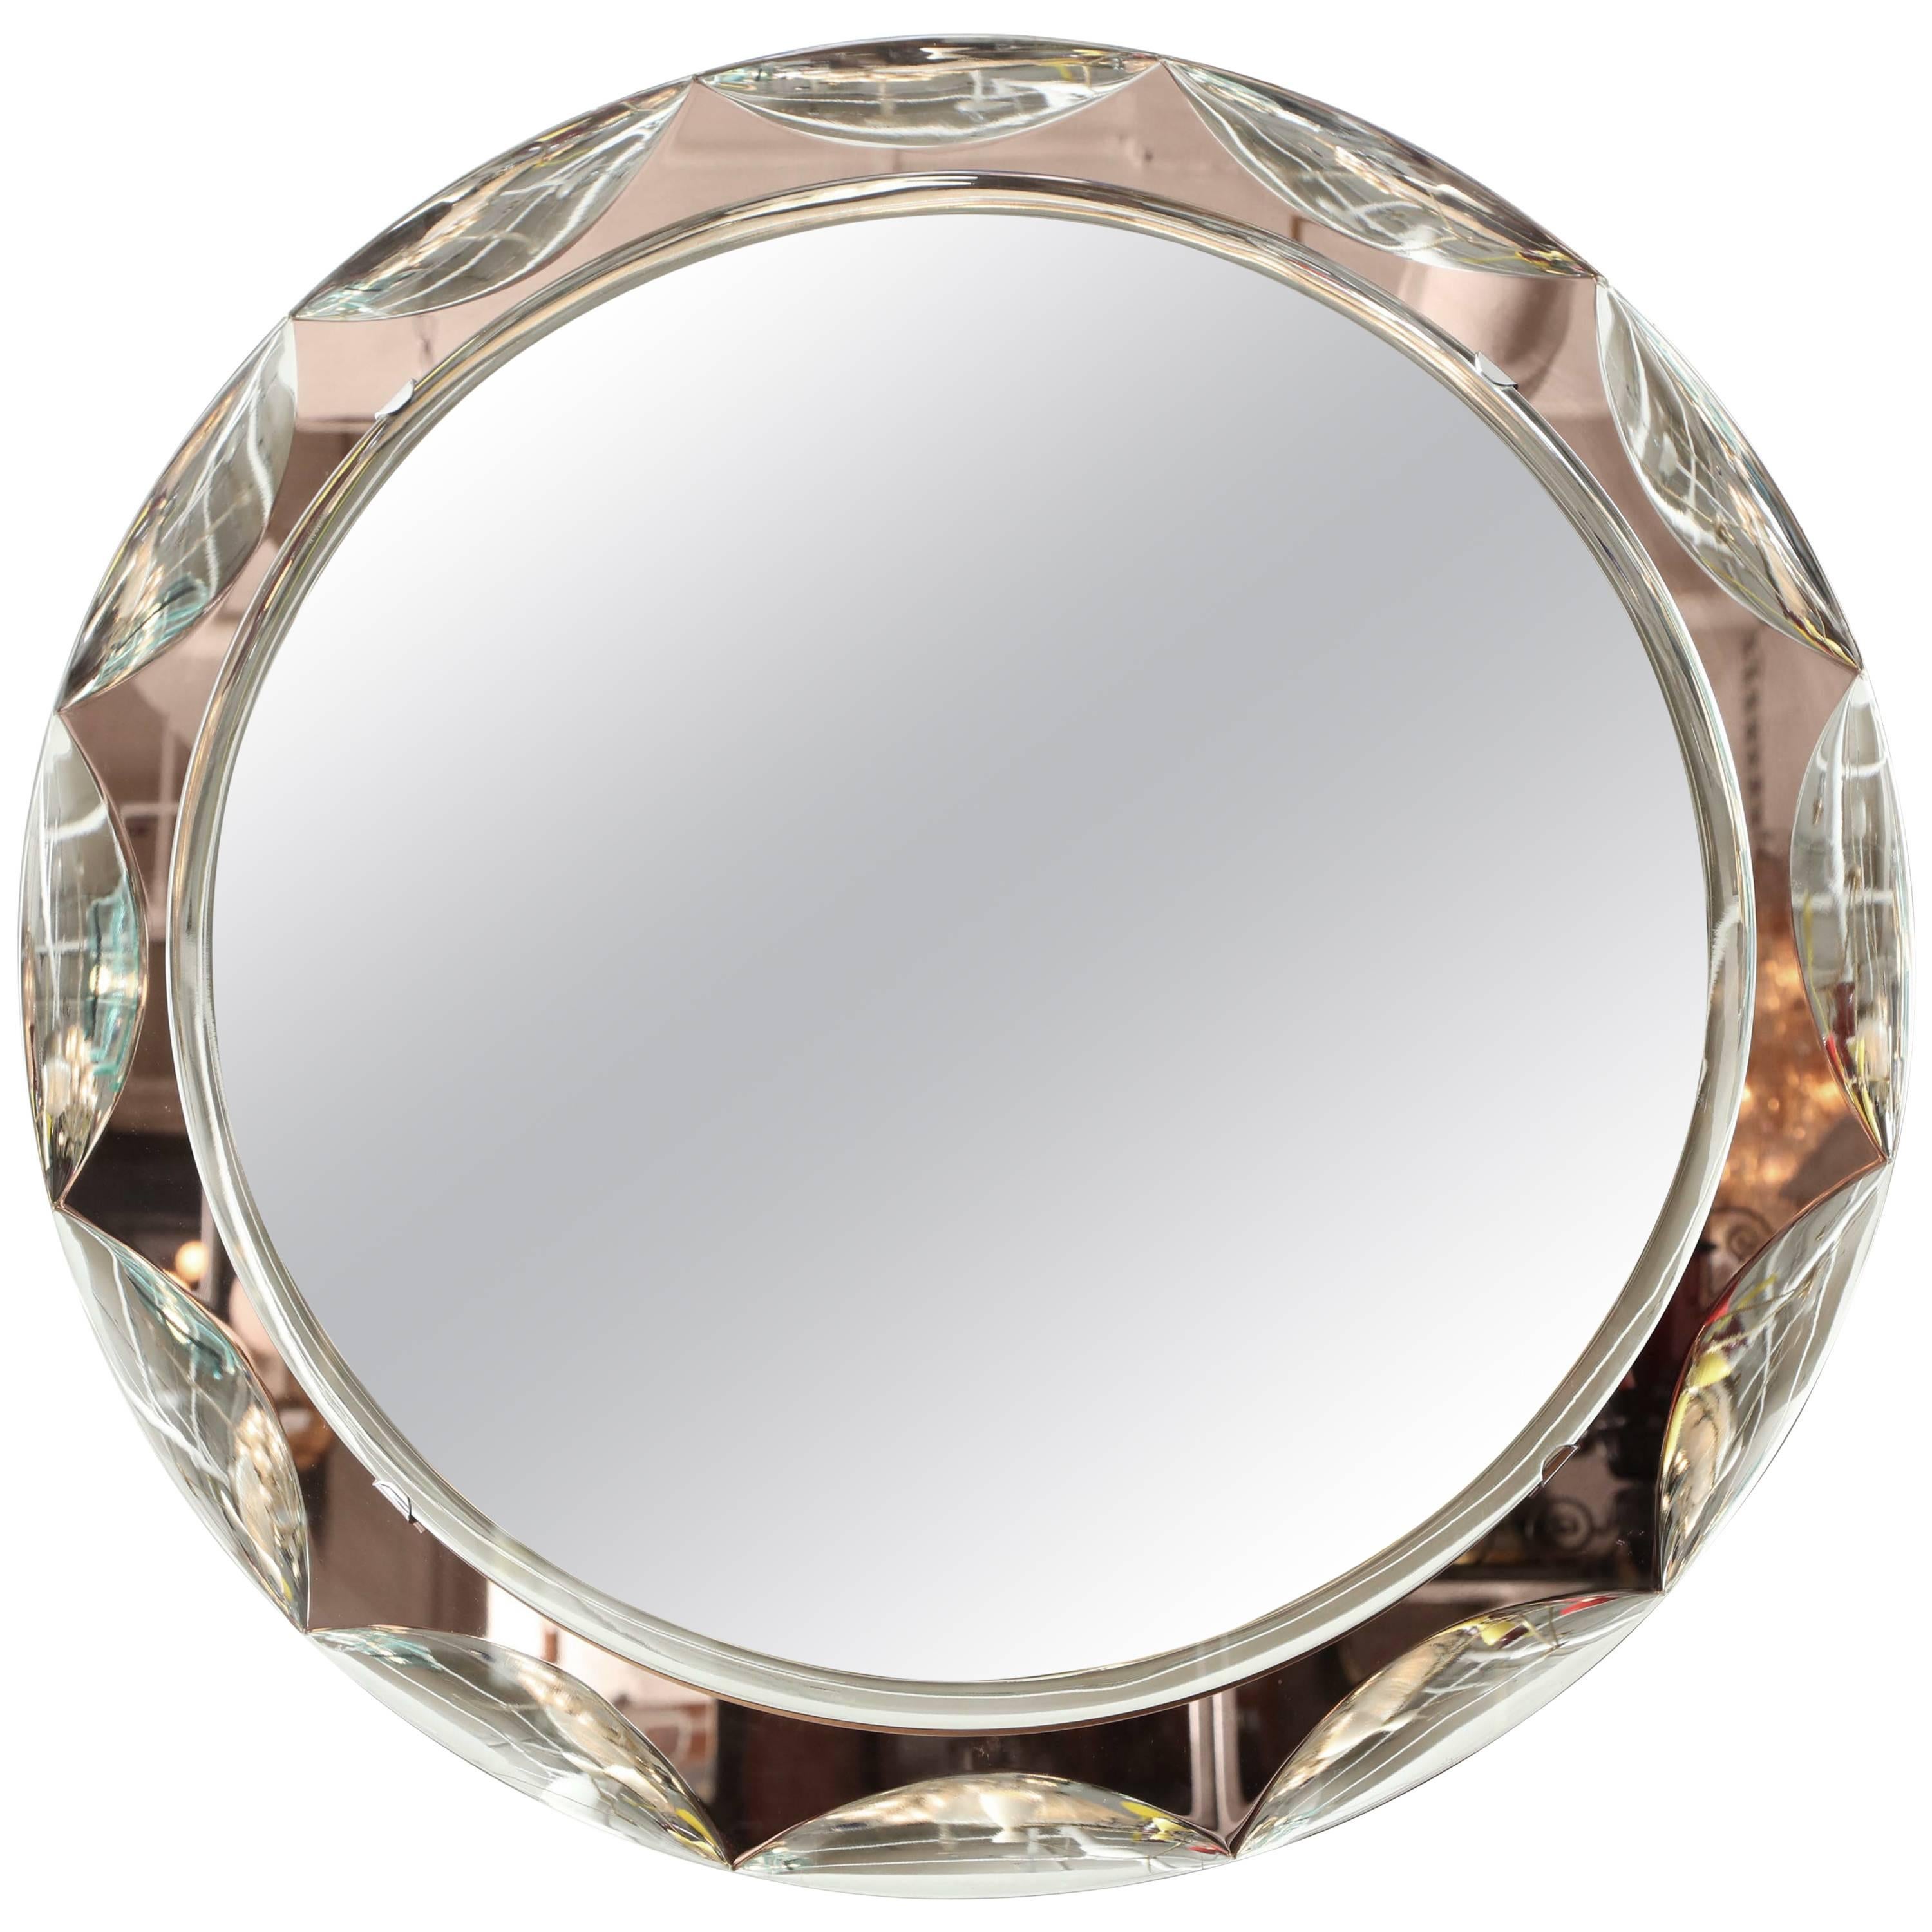 Mirror Made by Cristal Arte